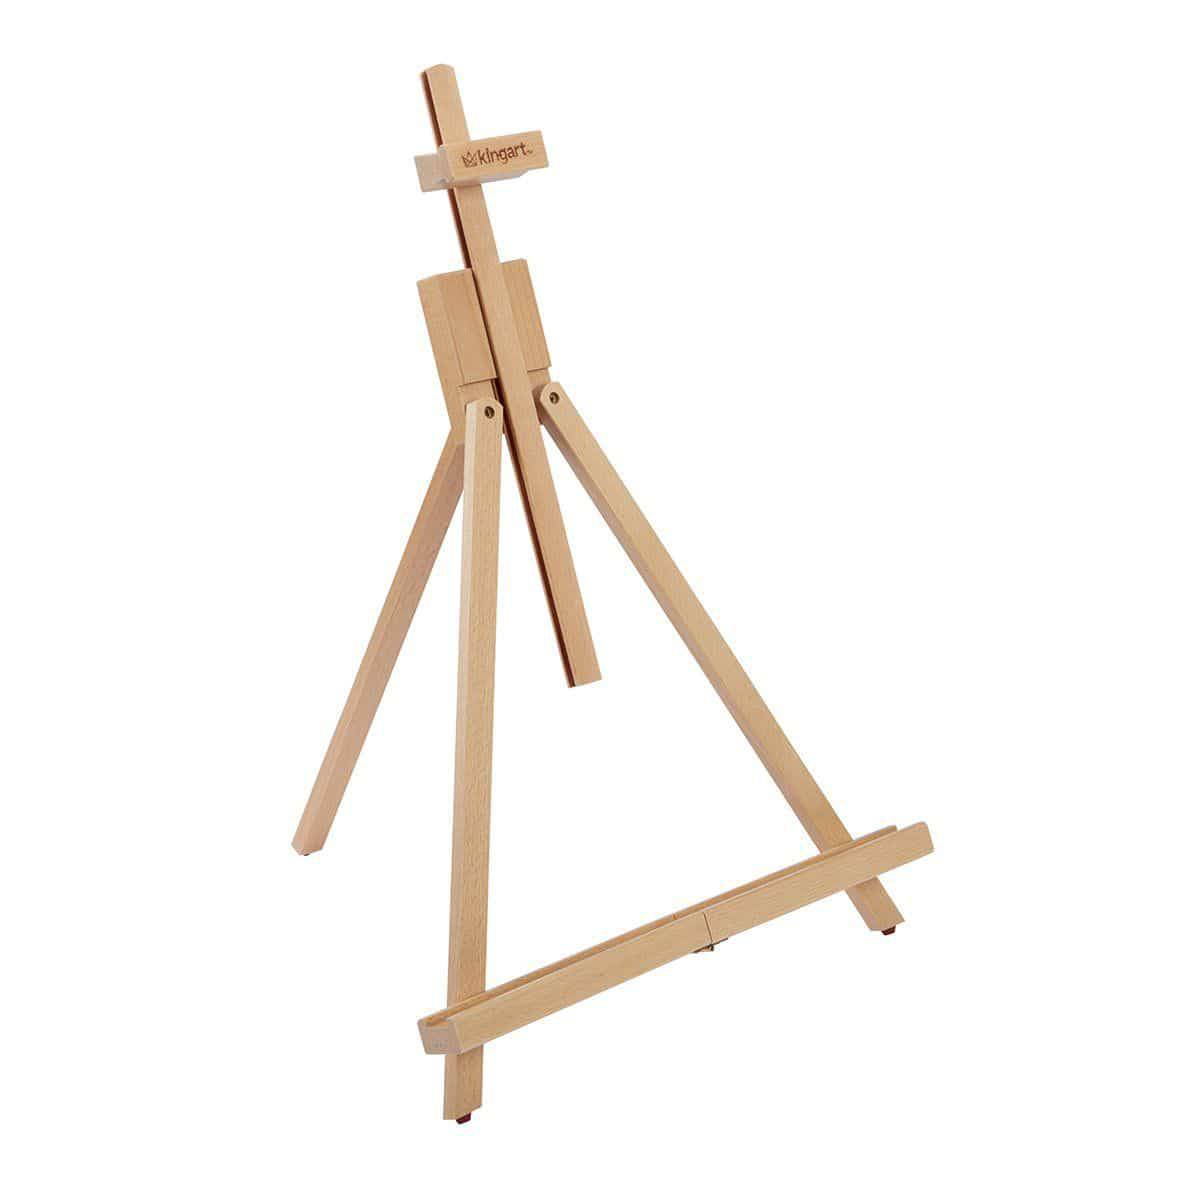 Easel - Wooden Art Easel for Tabletop or Desktop - Artists Kids Adults  Table Easel - Adjustable and Foldable - Holds Up to 23 Inches in Height 